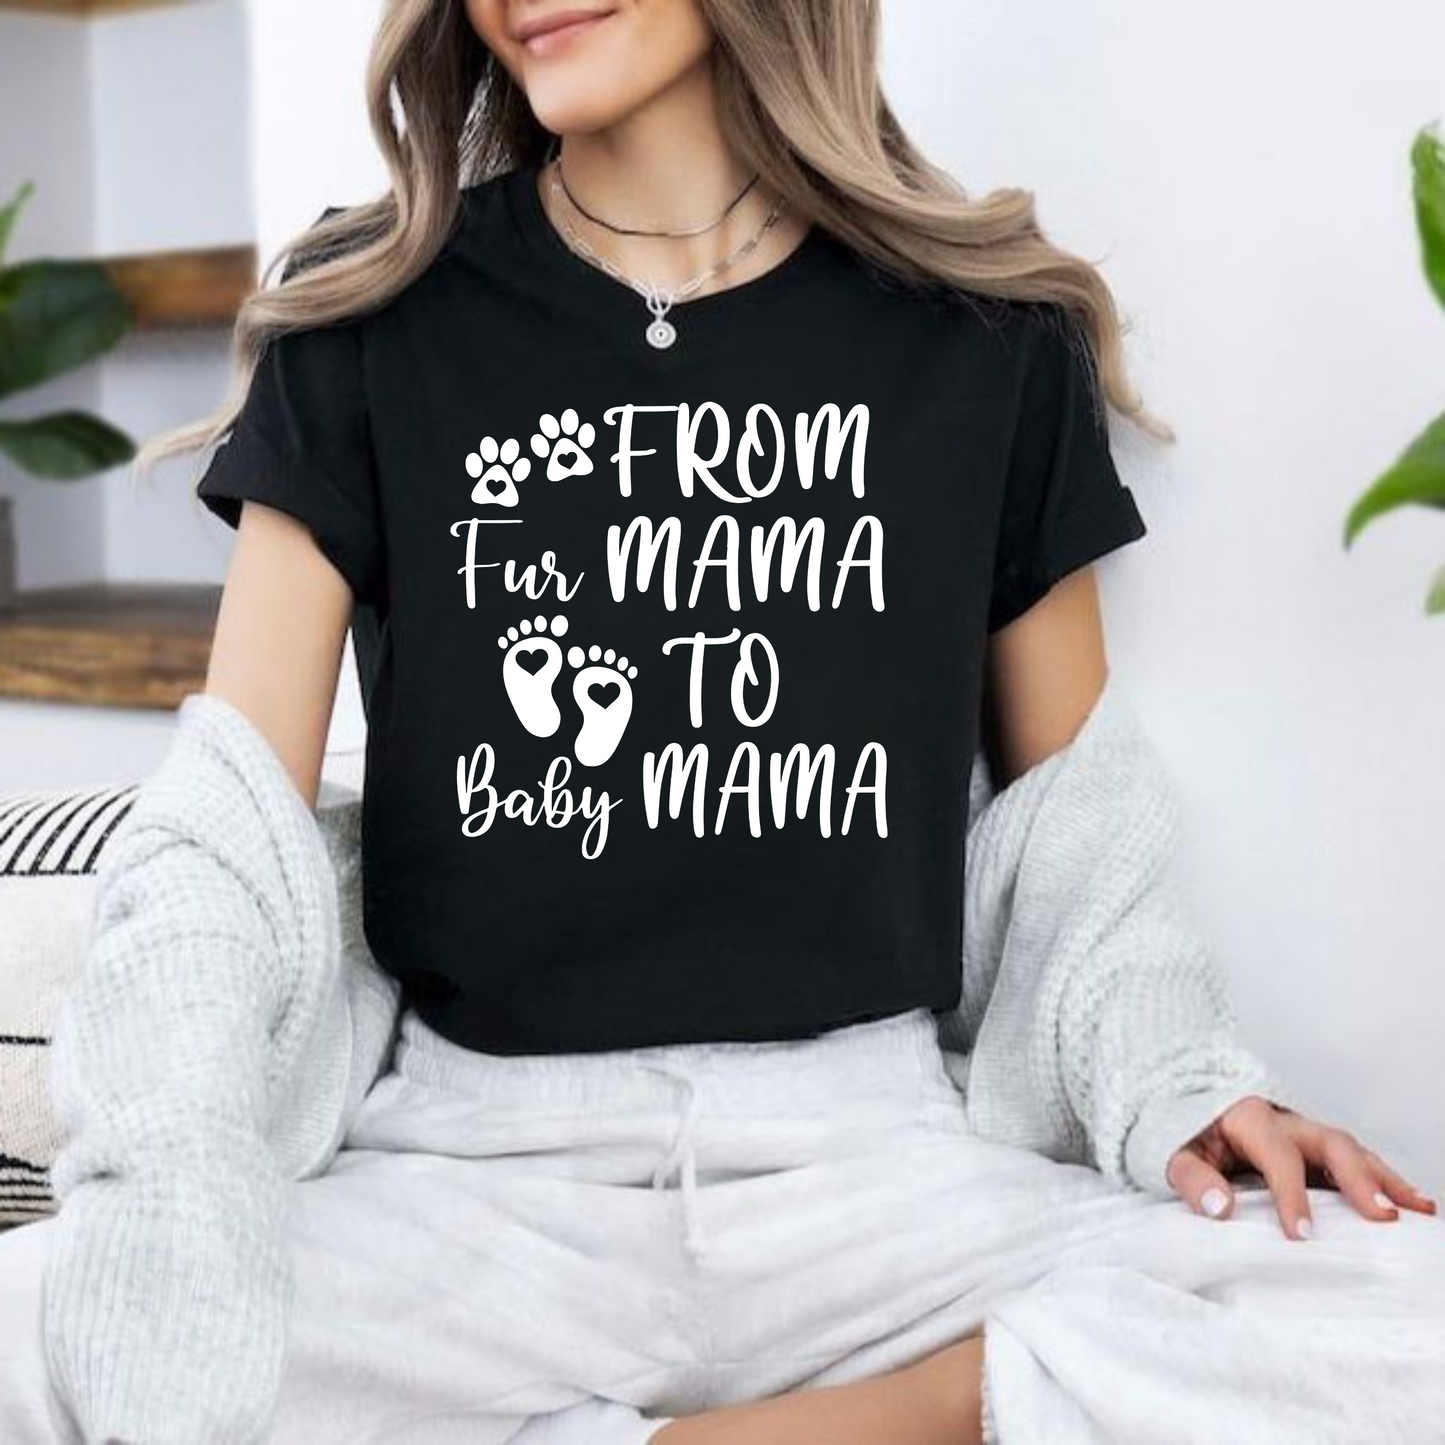 From Fur Mama to Baby Mama - Perfect Mother's Day Gift